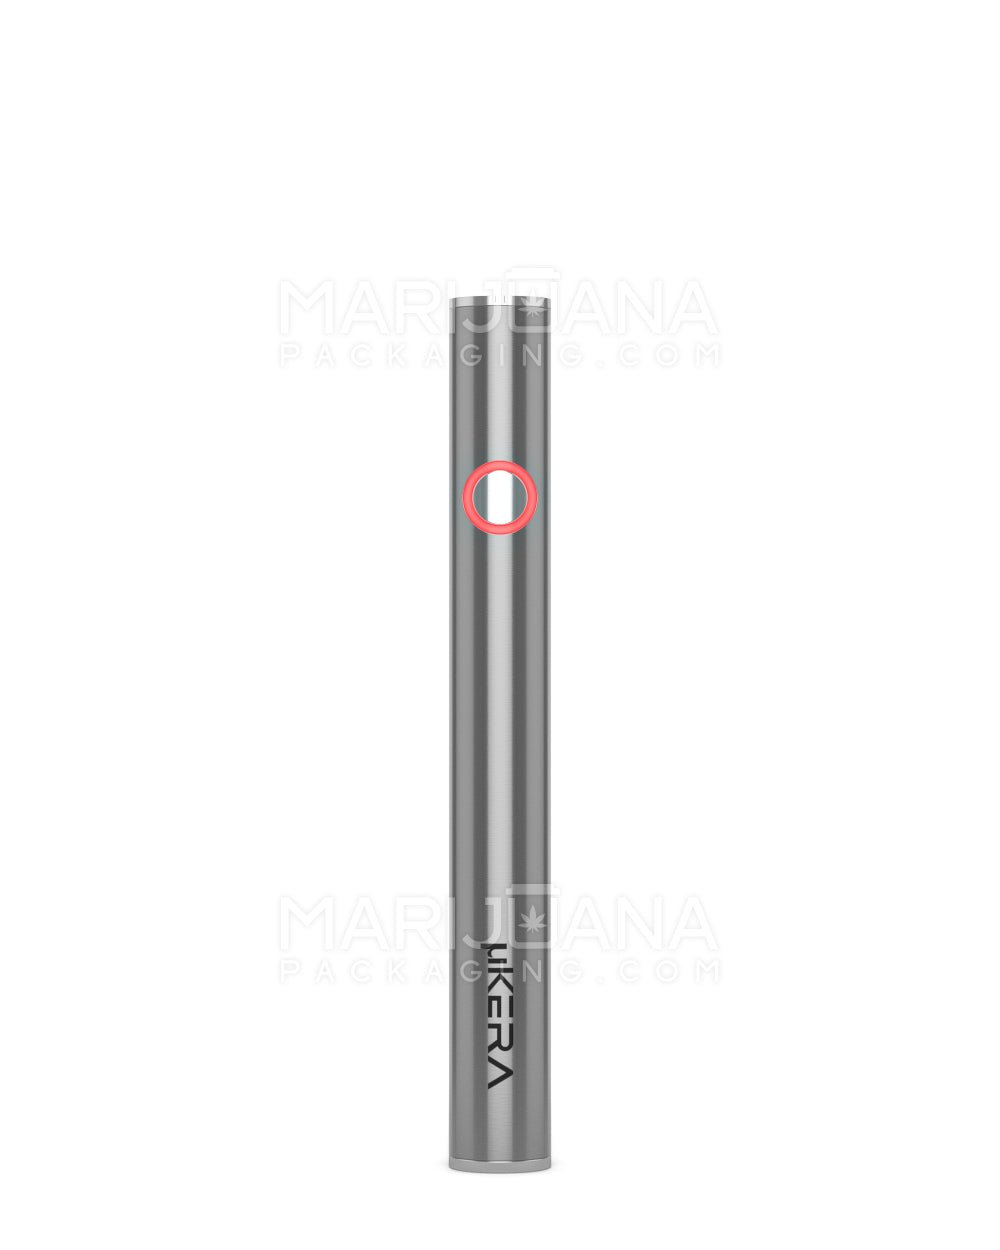 RAE | Variable Voltage Vape Battery | 320mAh - Silver - 640 Count - 1